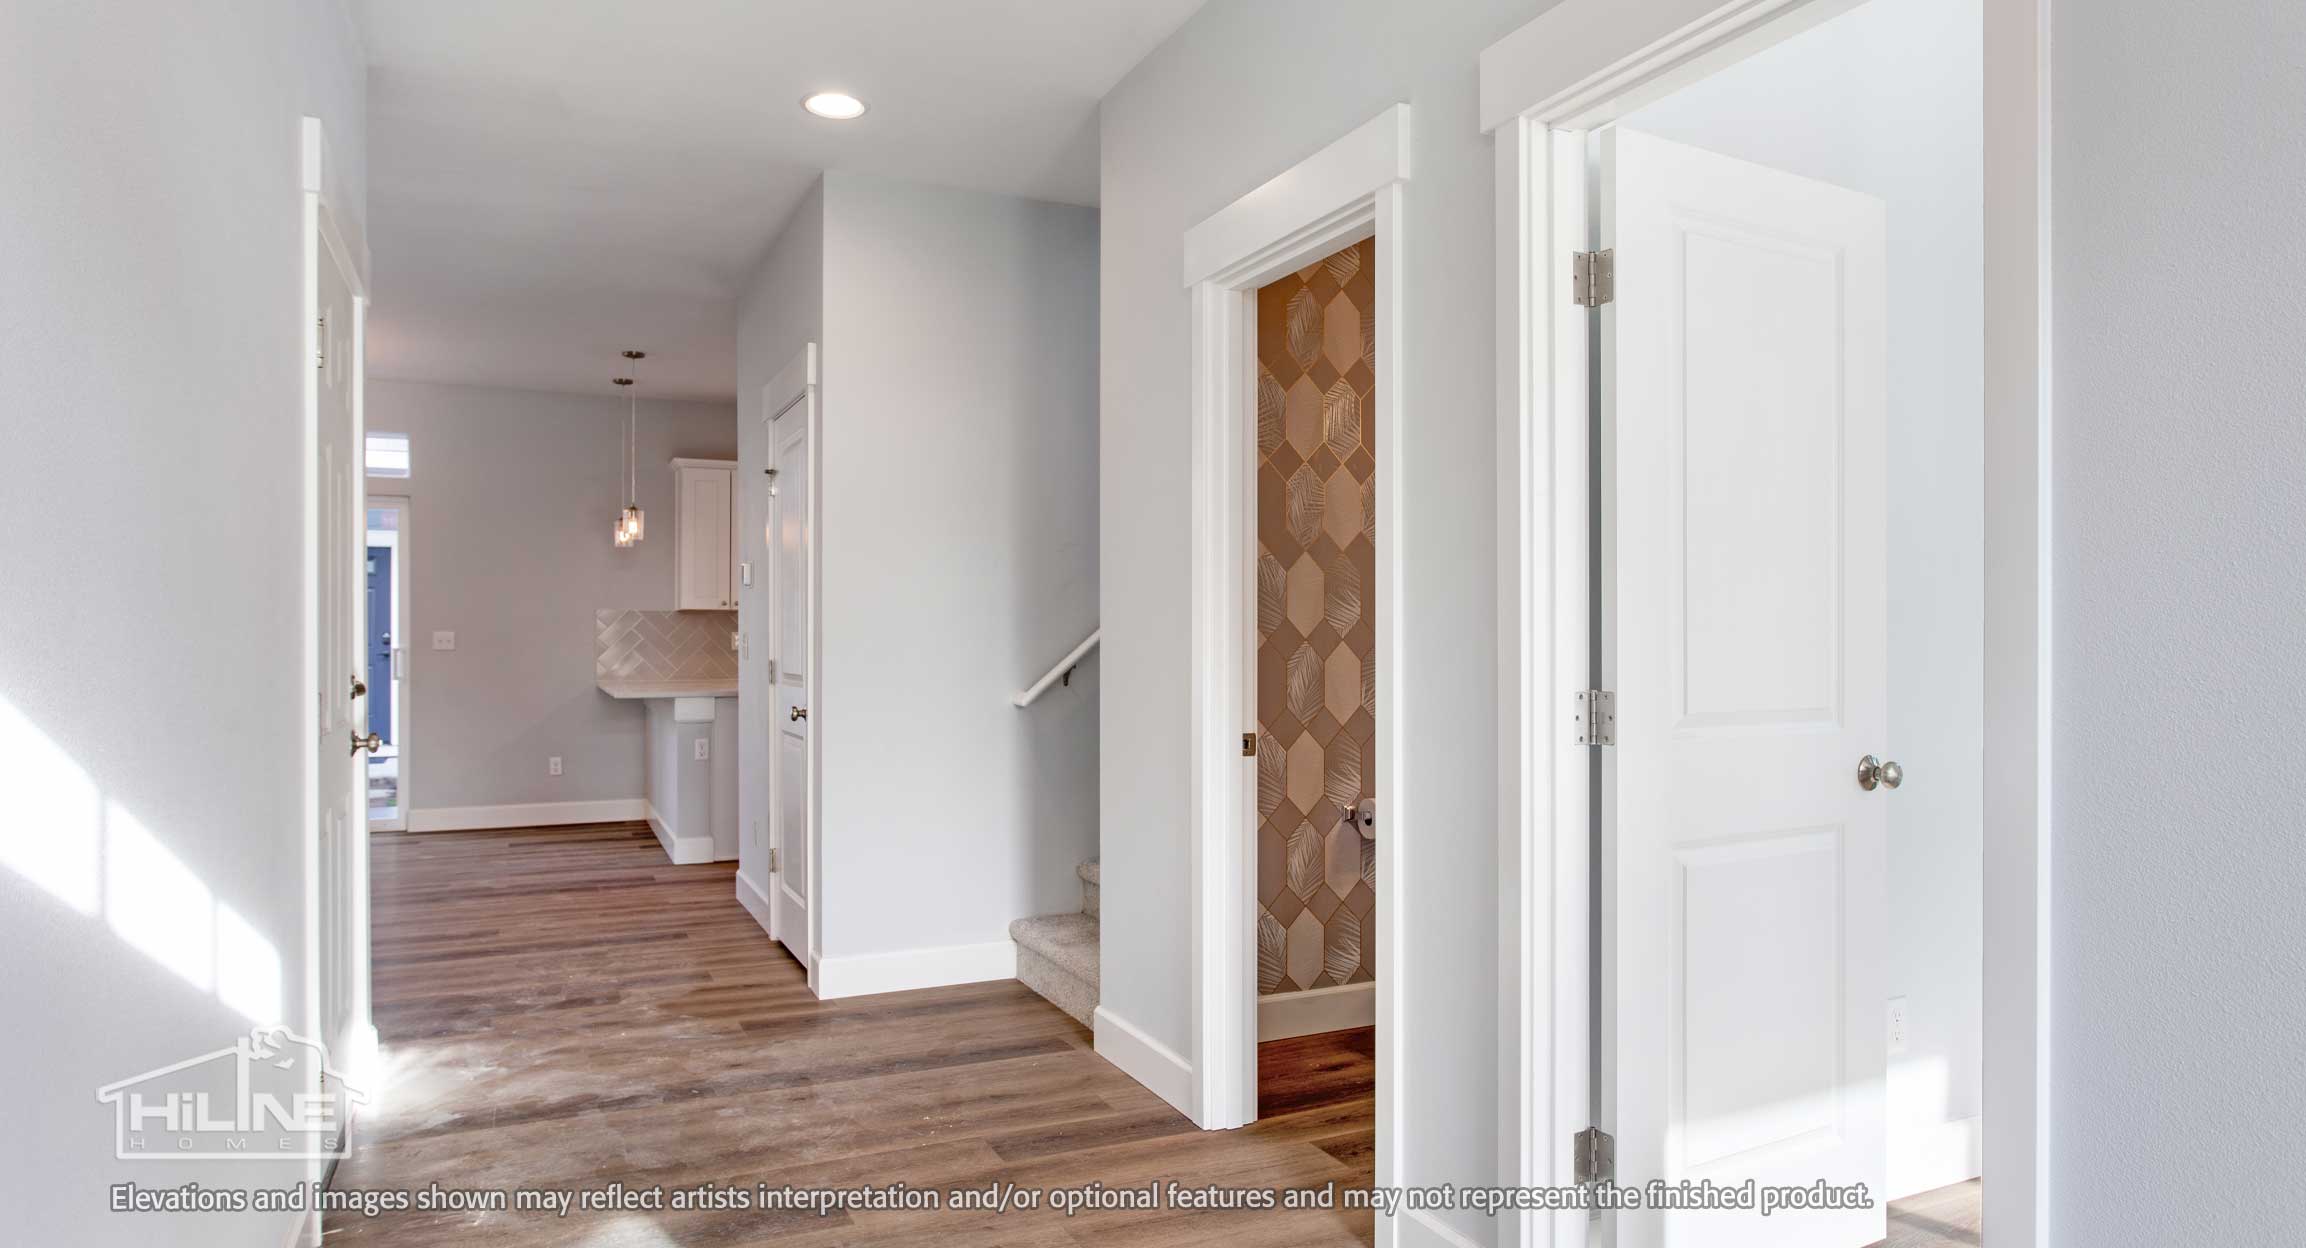 Image of Home Plan 2373 Entry Hallway with Office/Bedroom 5 Off to the Right.